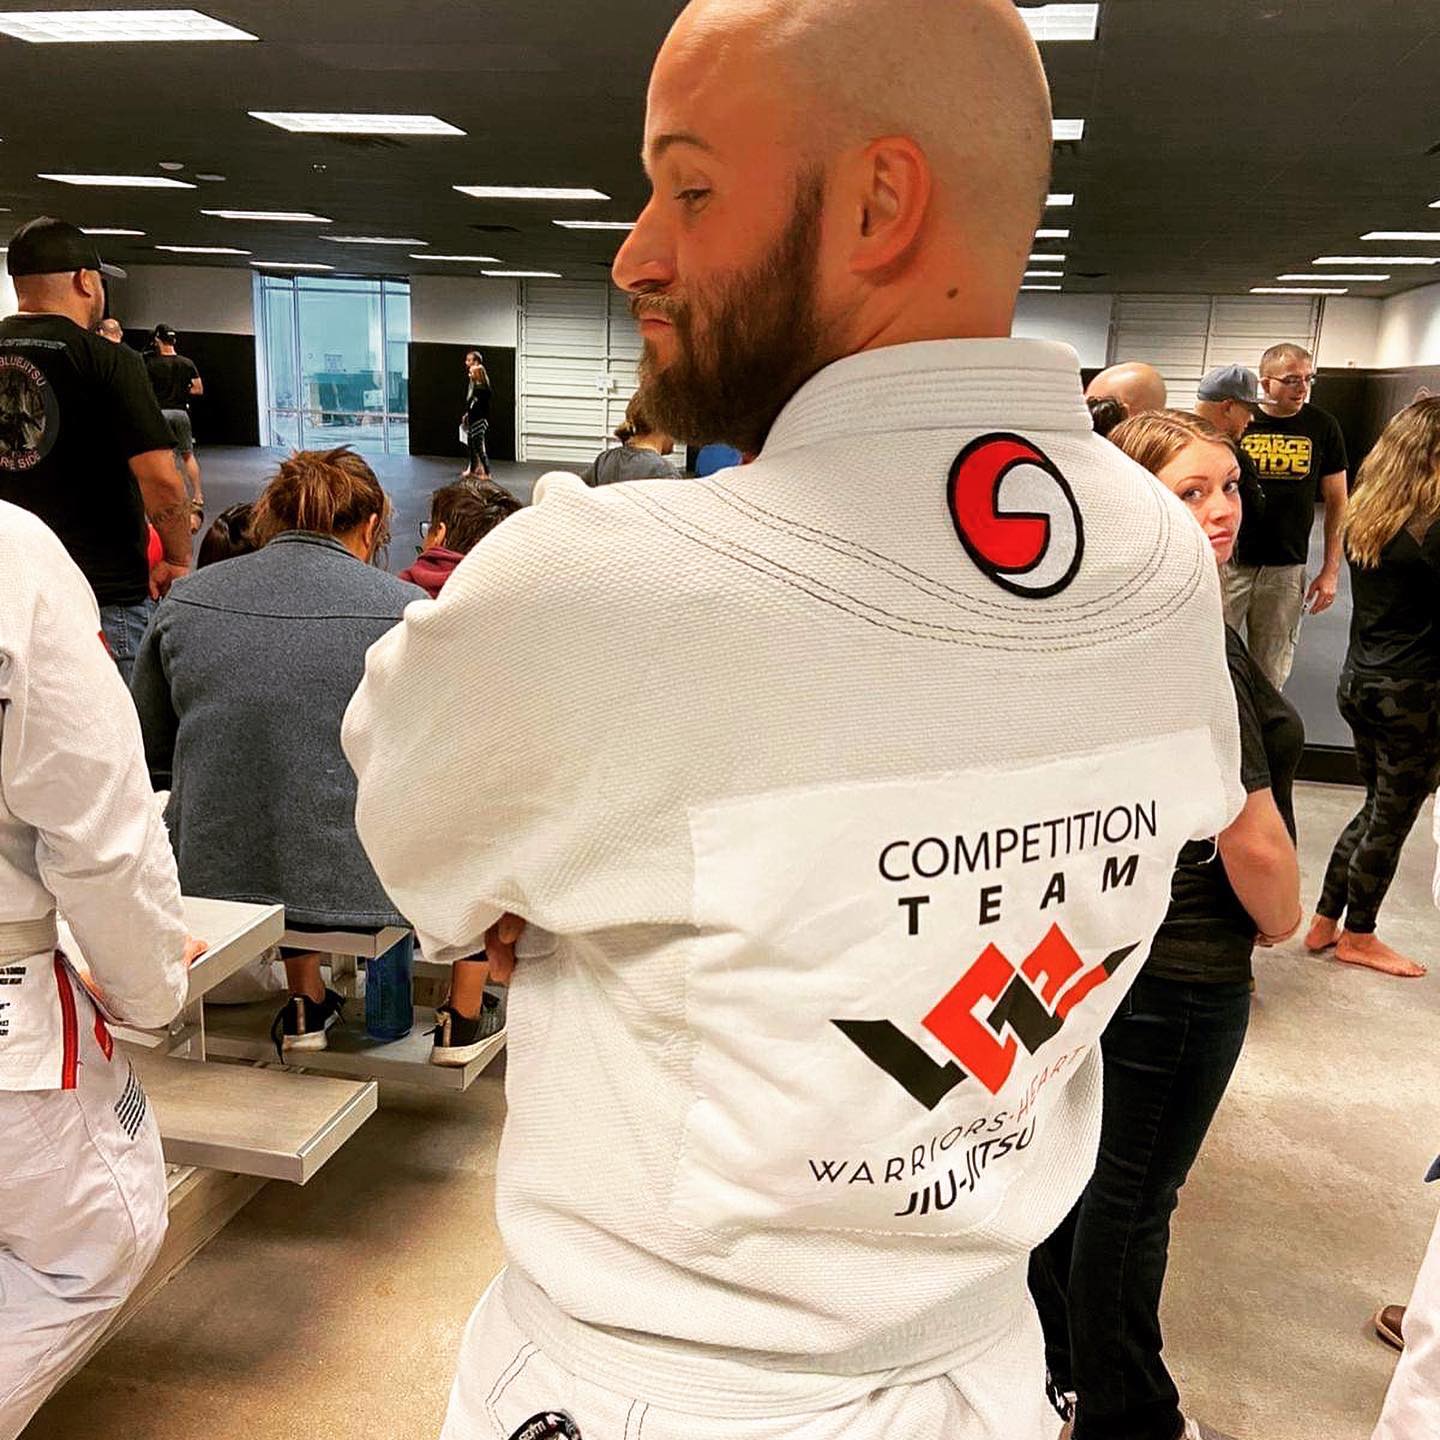 Warriors Heart Zack Poteat - Jiu Jitsu Team - Warriors Heart is an addiction and PTSD treatment center for active military, veterans, and first responders. Contact us today at (844) 448-2567.